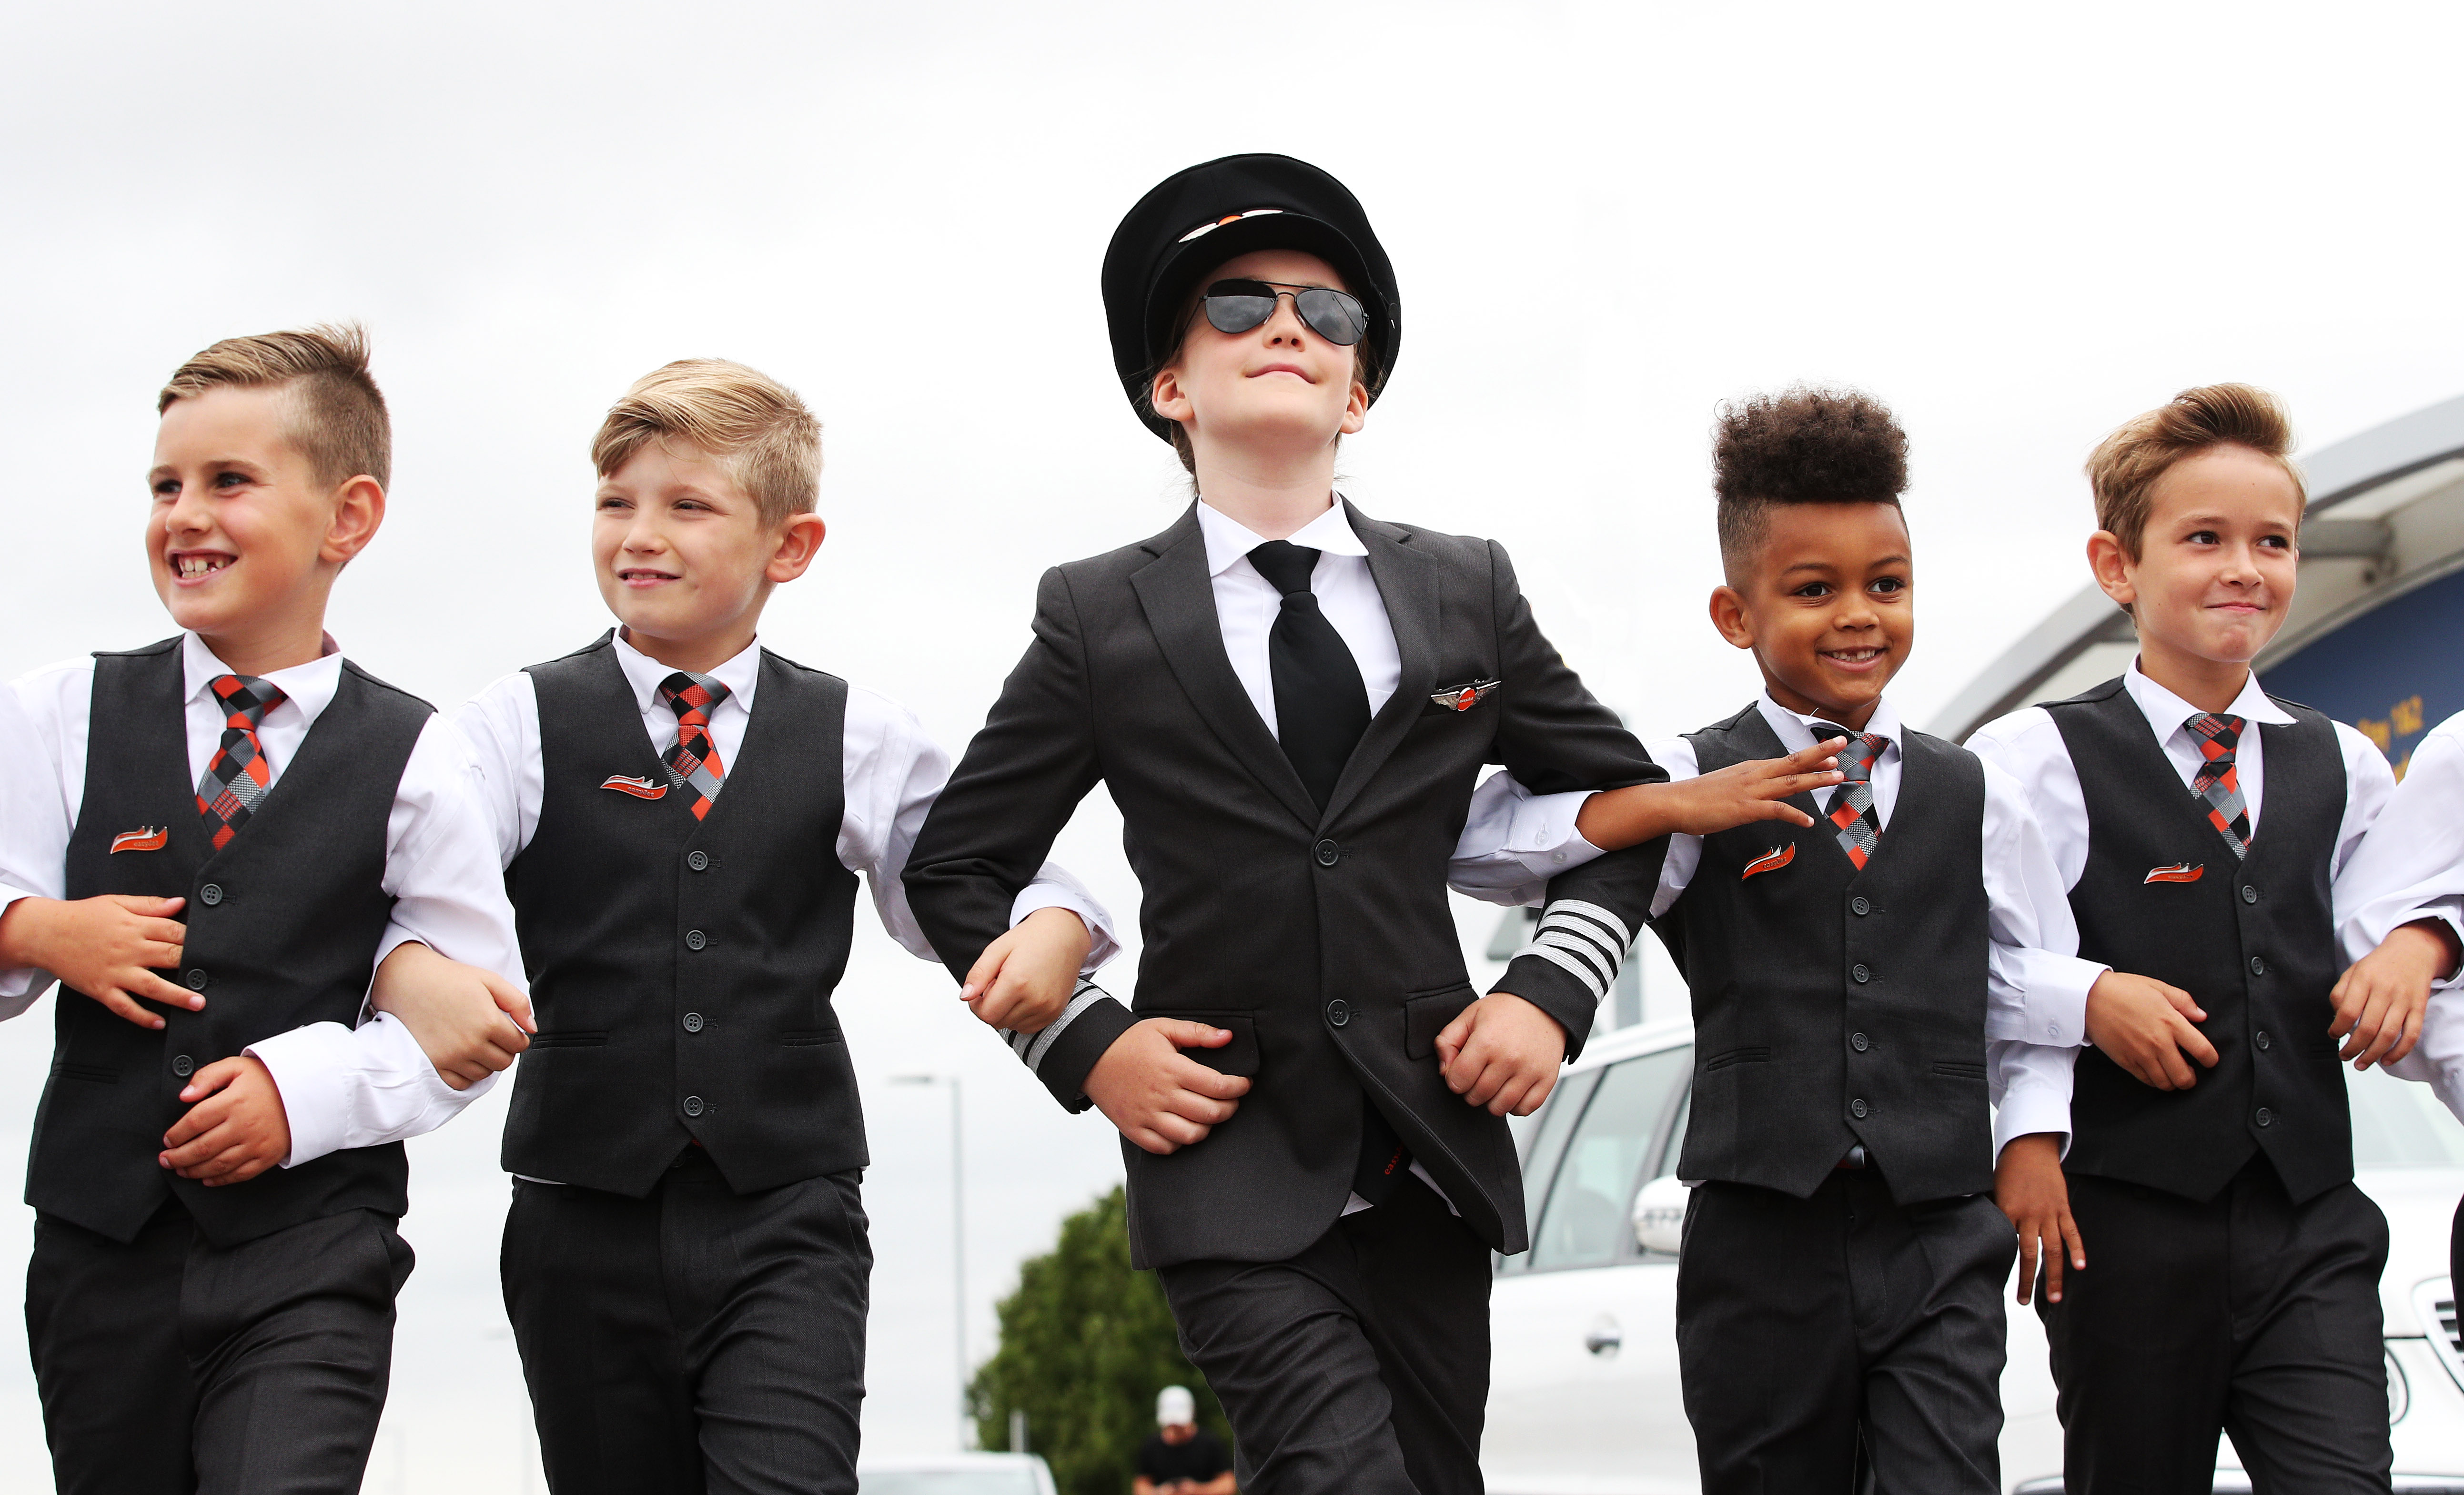 EasyJet wants to encourage more girls to pursue a career as a pilot (easyJet/PA)